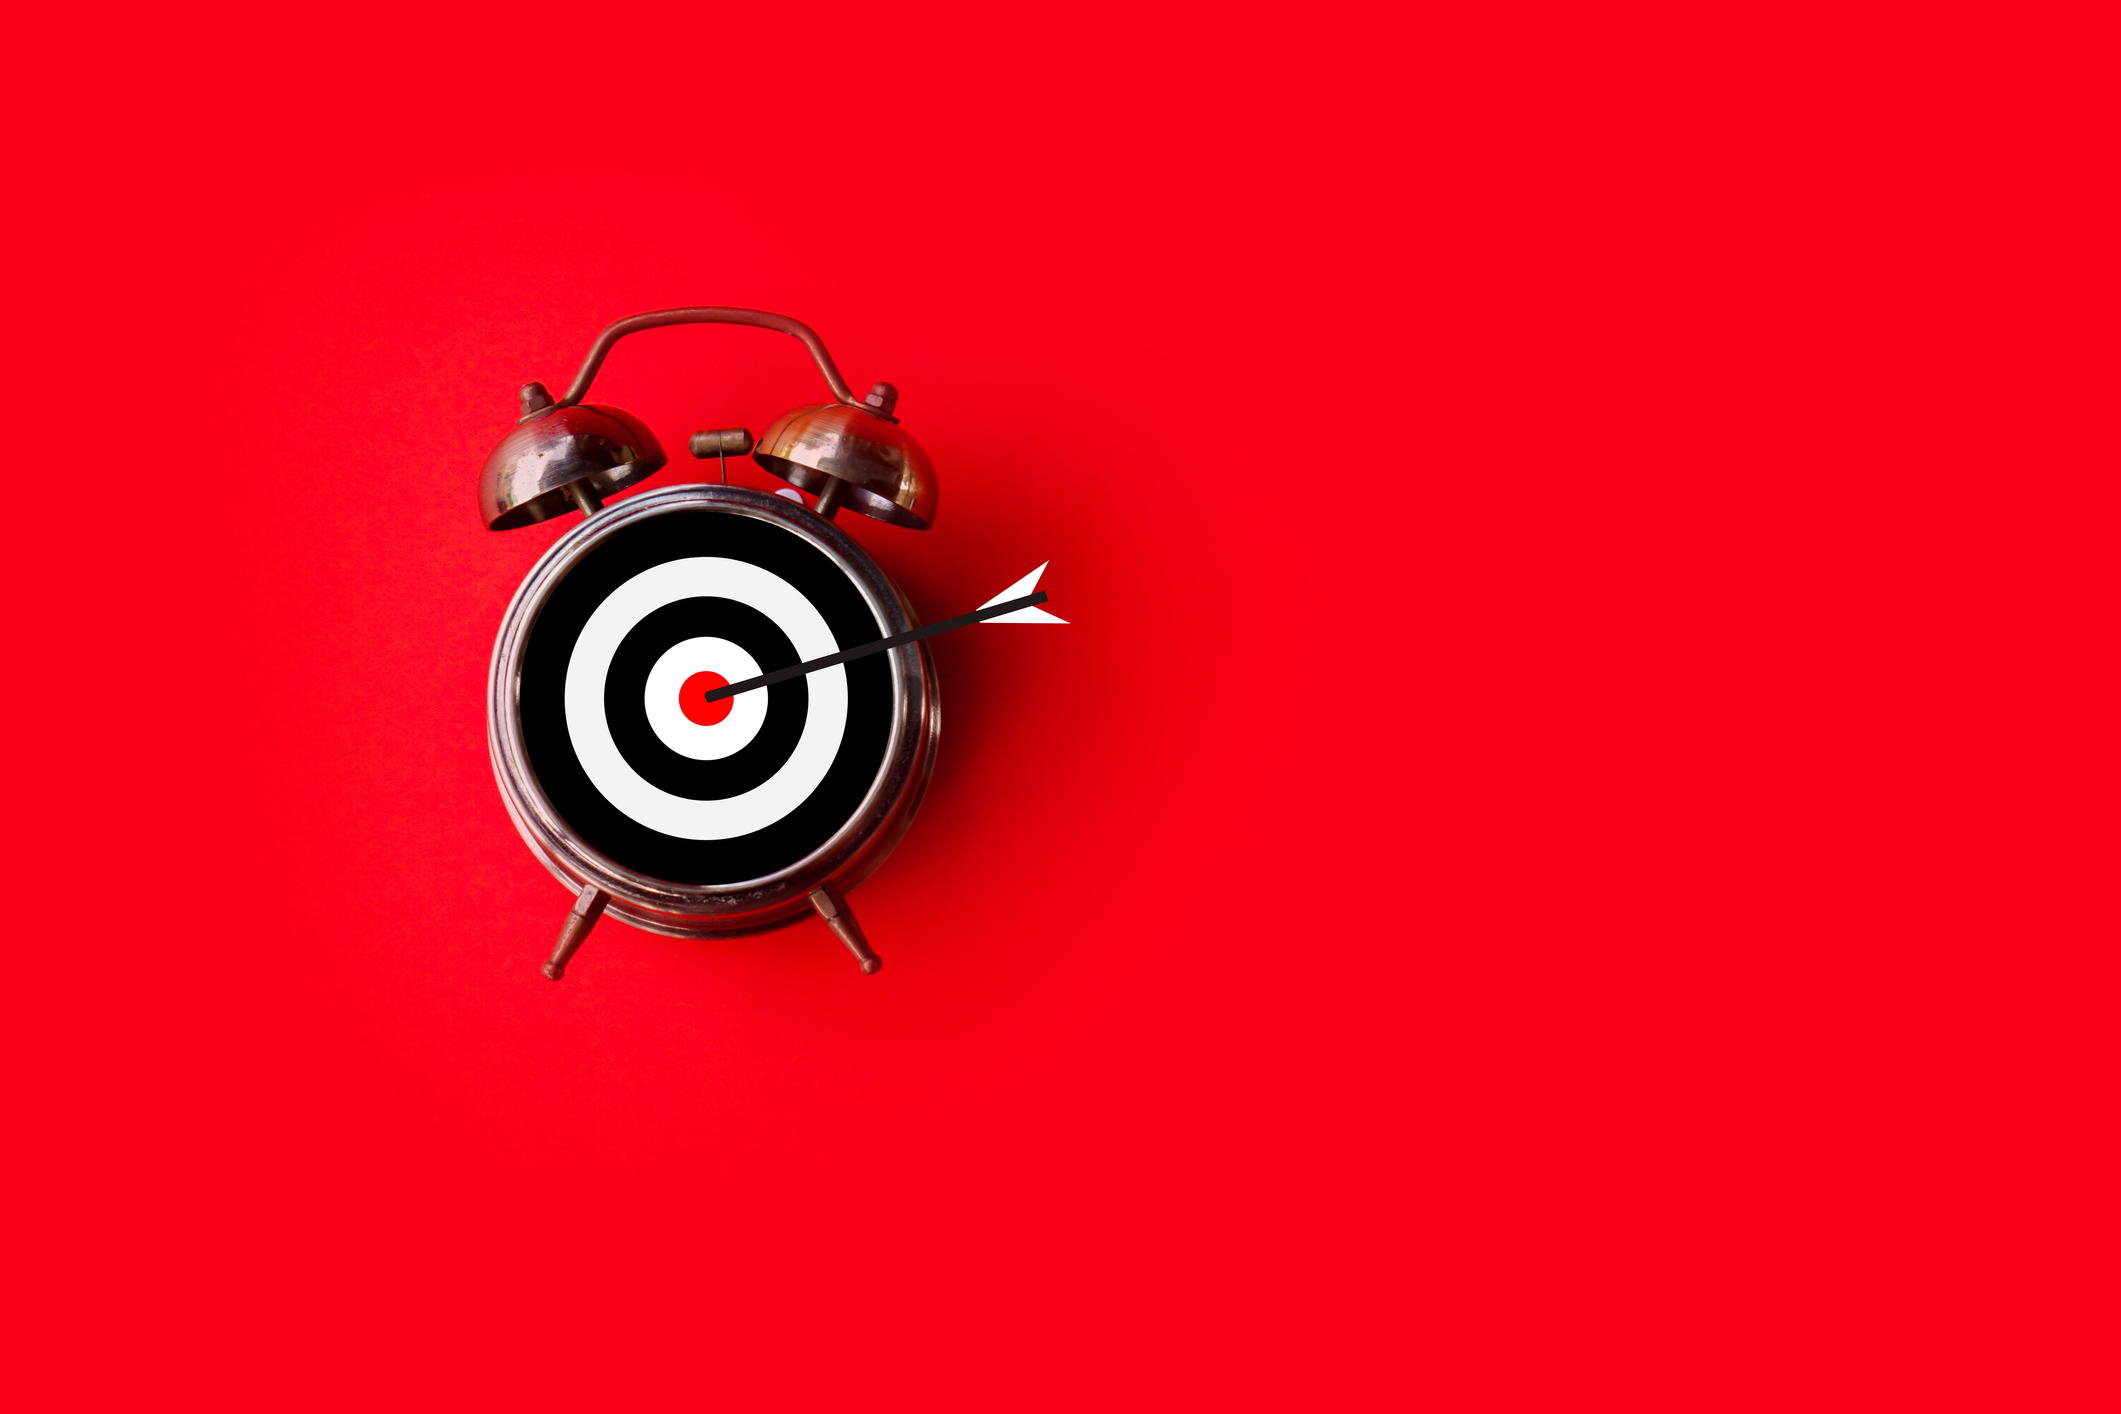 Time target, recording target on a clock face on a red background